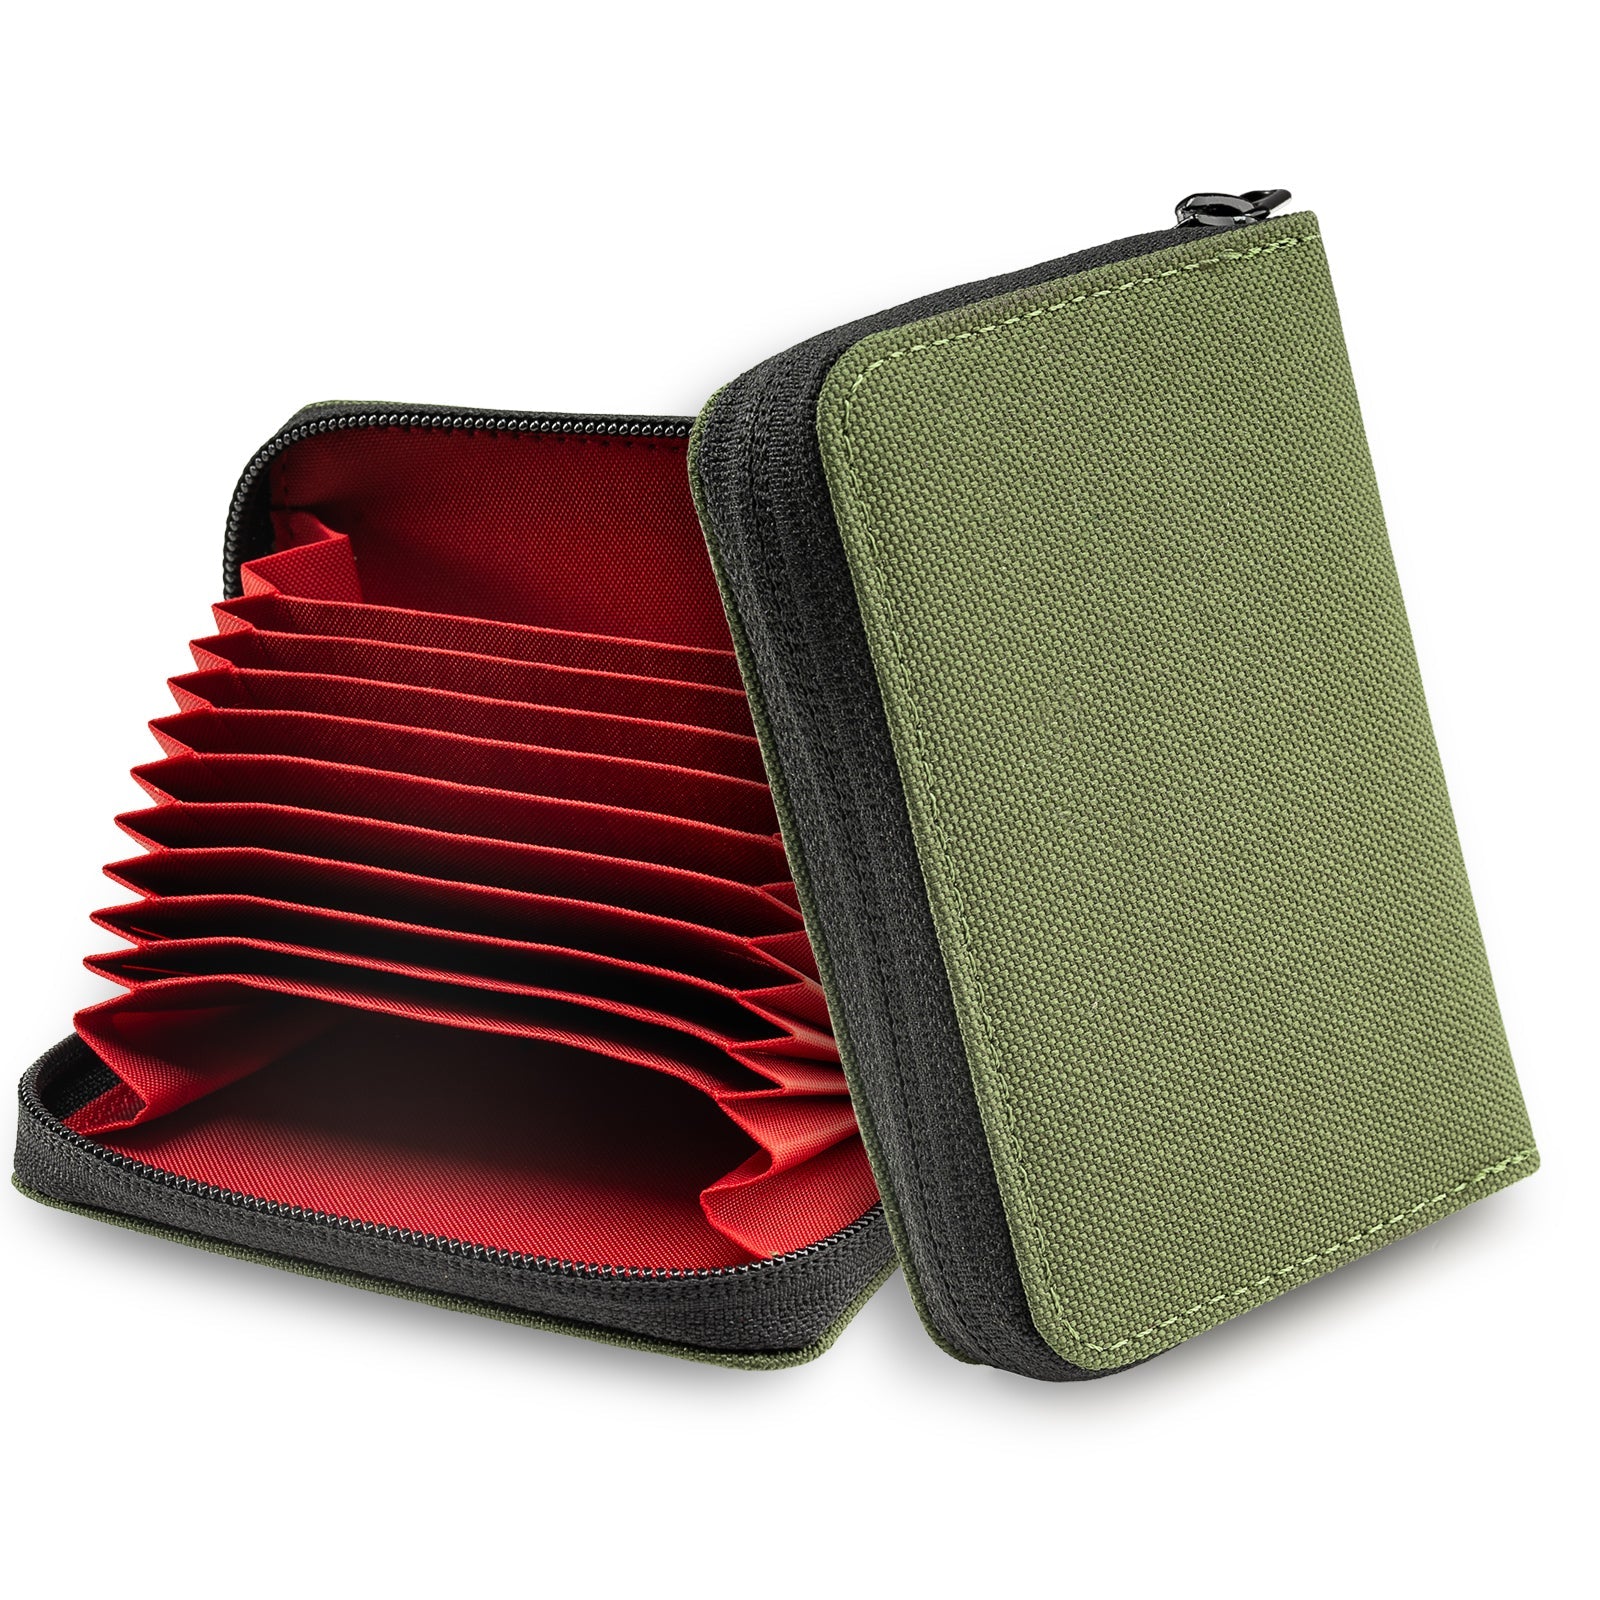 PC1 EDC Durable 11-Slot Nylon Card Holder for Credit Cards(GREEN)